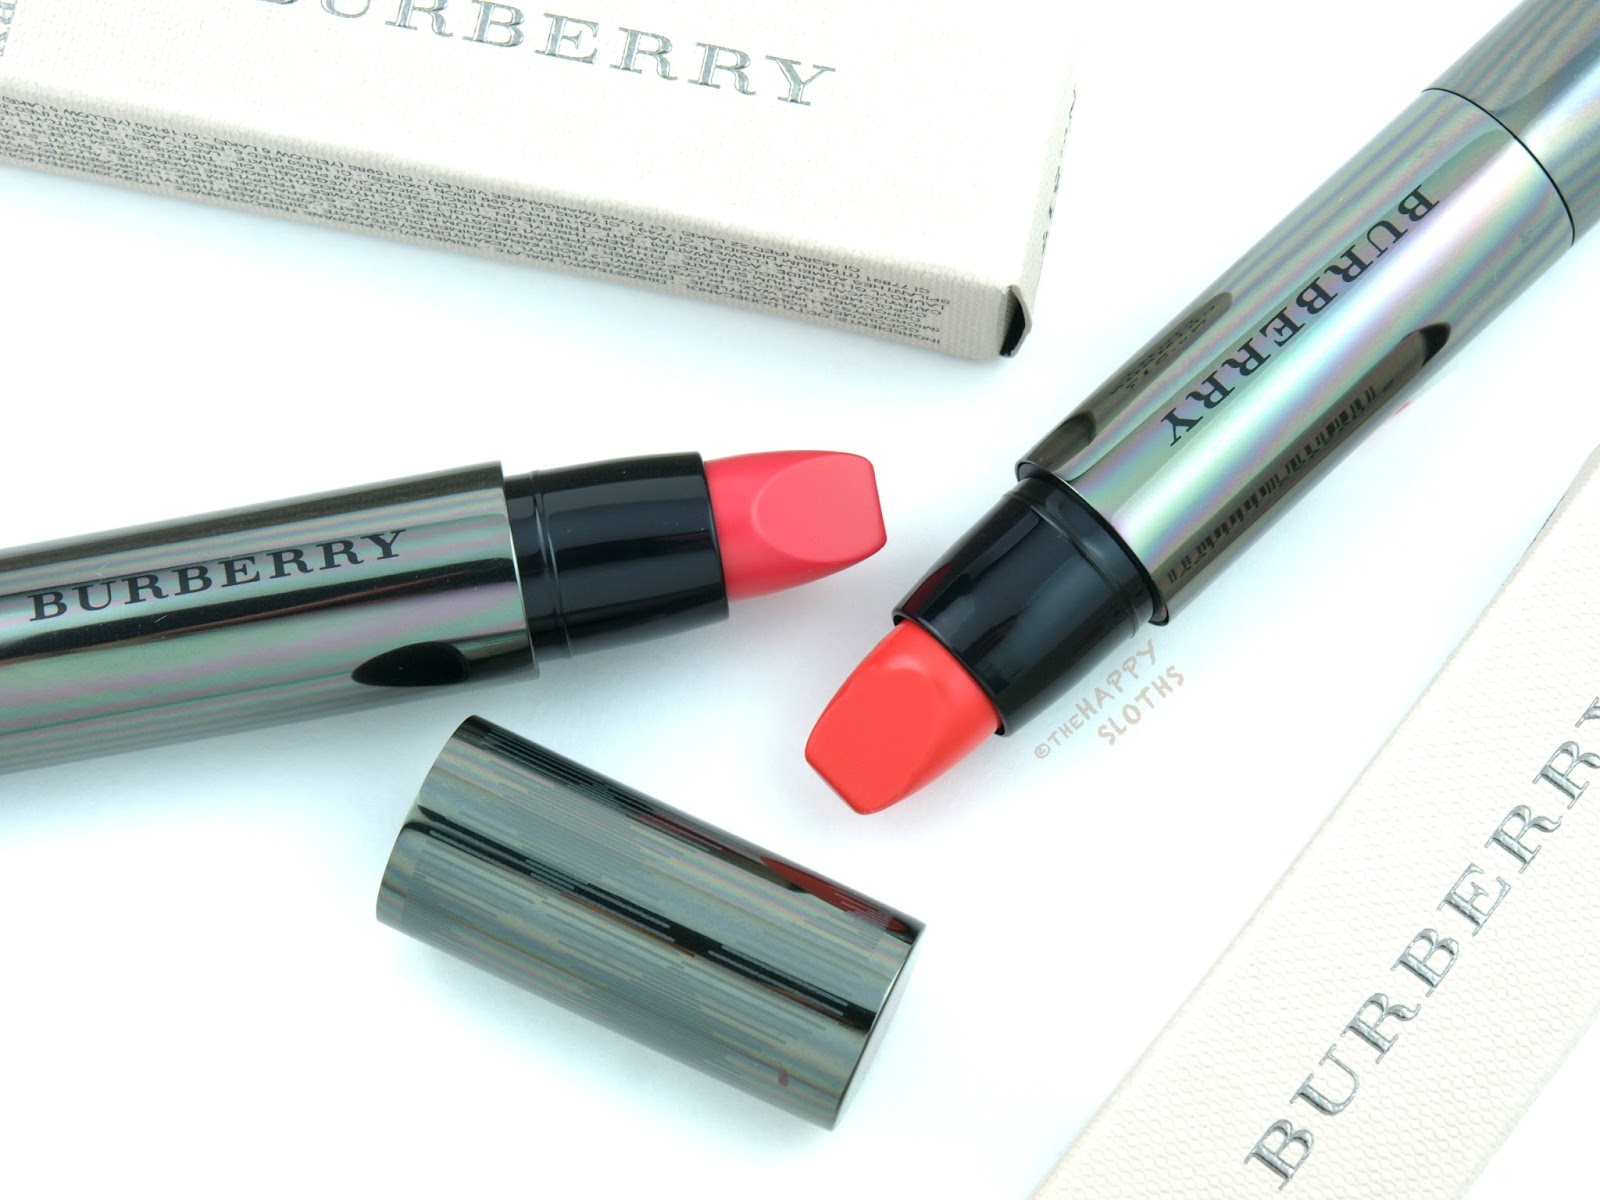 Burberry Full Kisses Lip Colors: Review and Swatches | The Happy Sloths:  Beauty, Makeup, and Skincare Blog with Reviews and Swatches